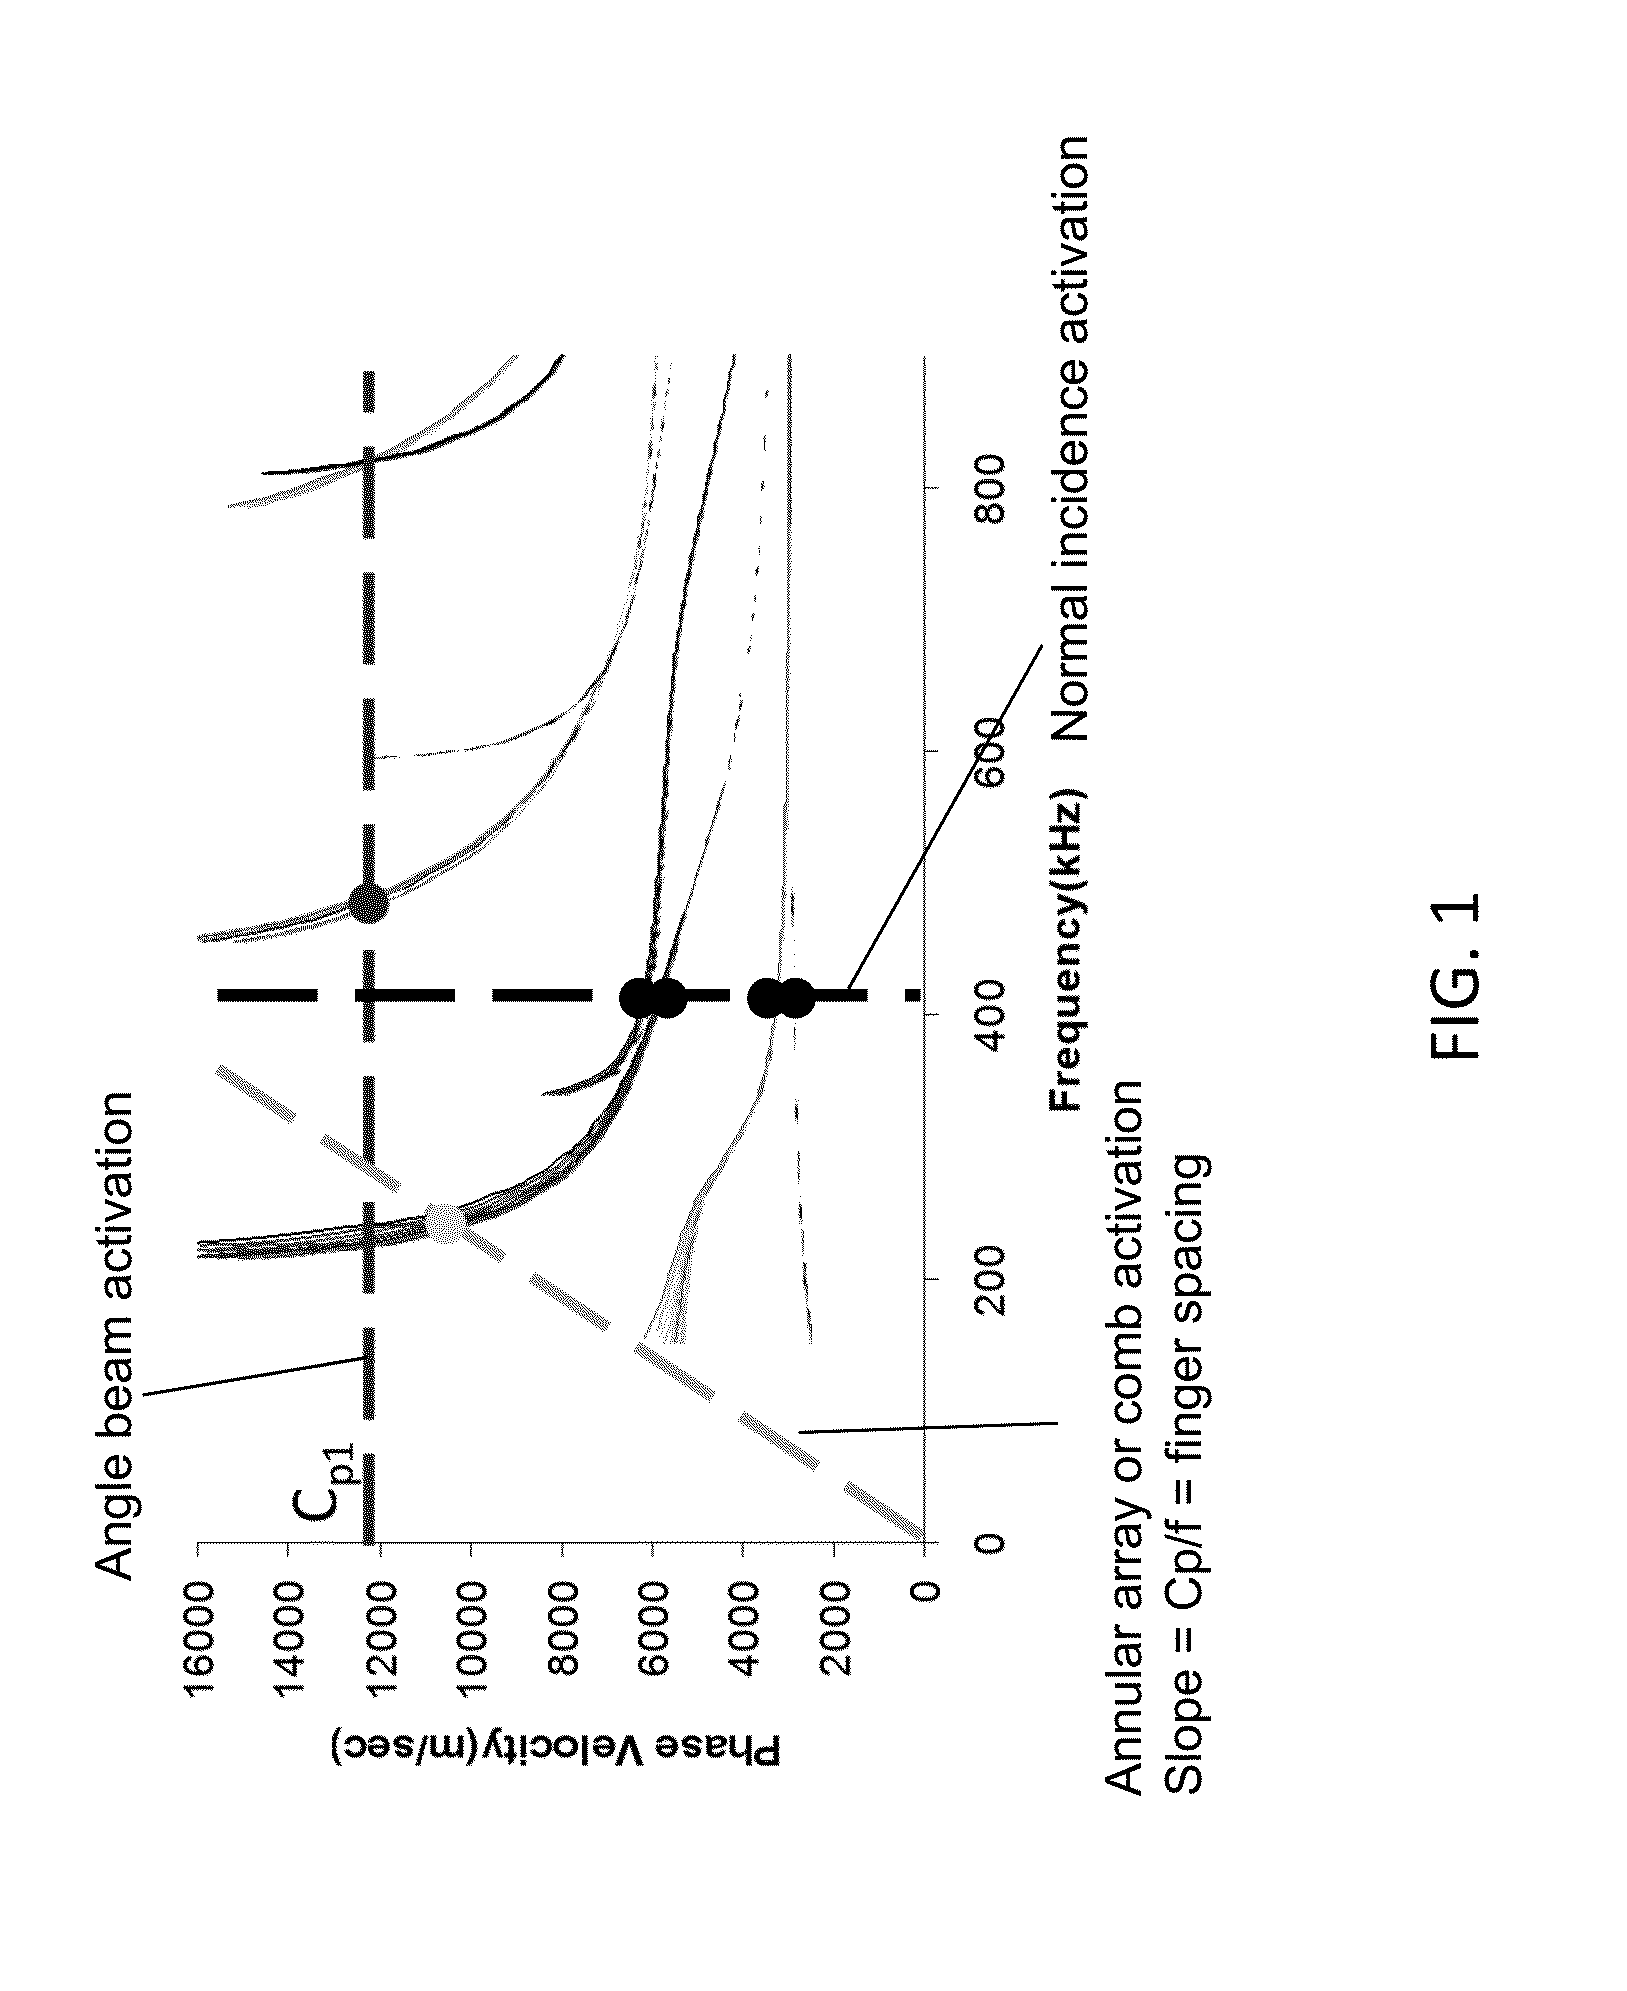 Ultrasonic vibration system and method for removing/avoiding unwanted build-up on structures